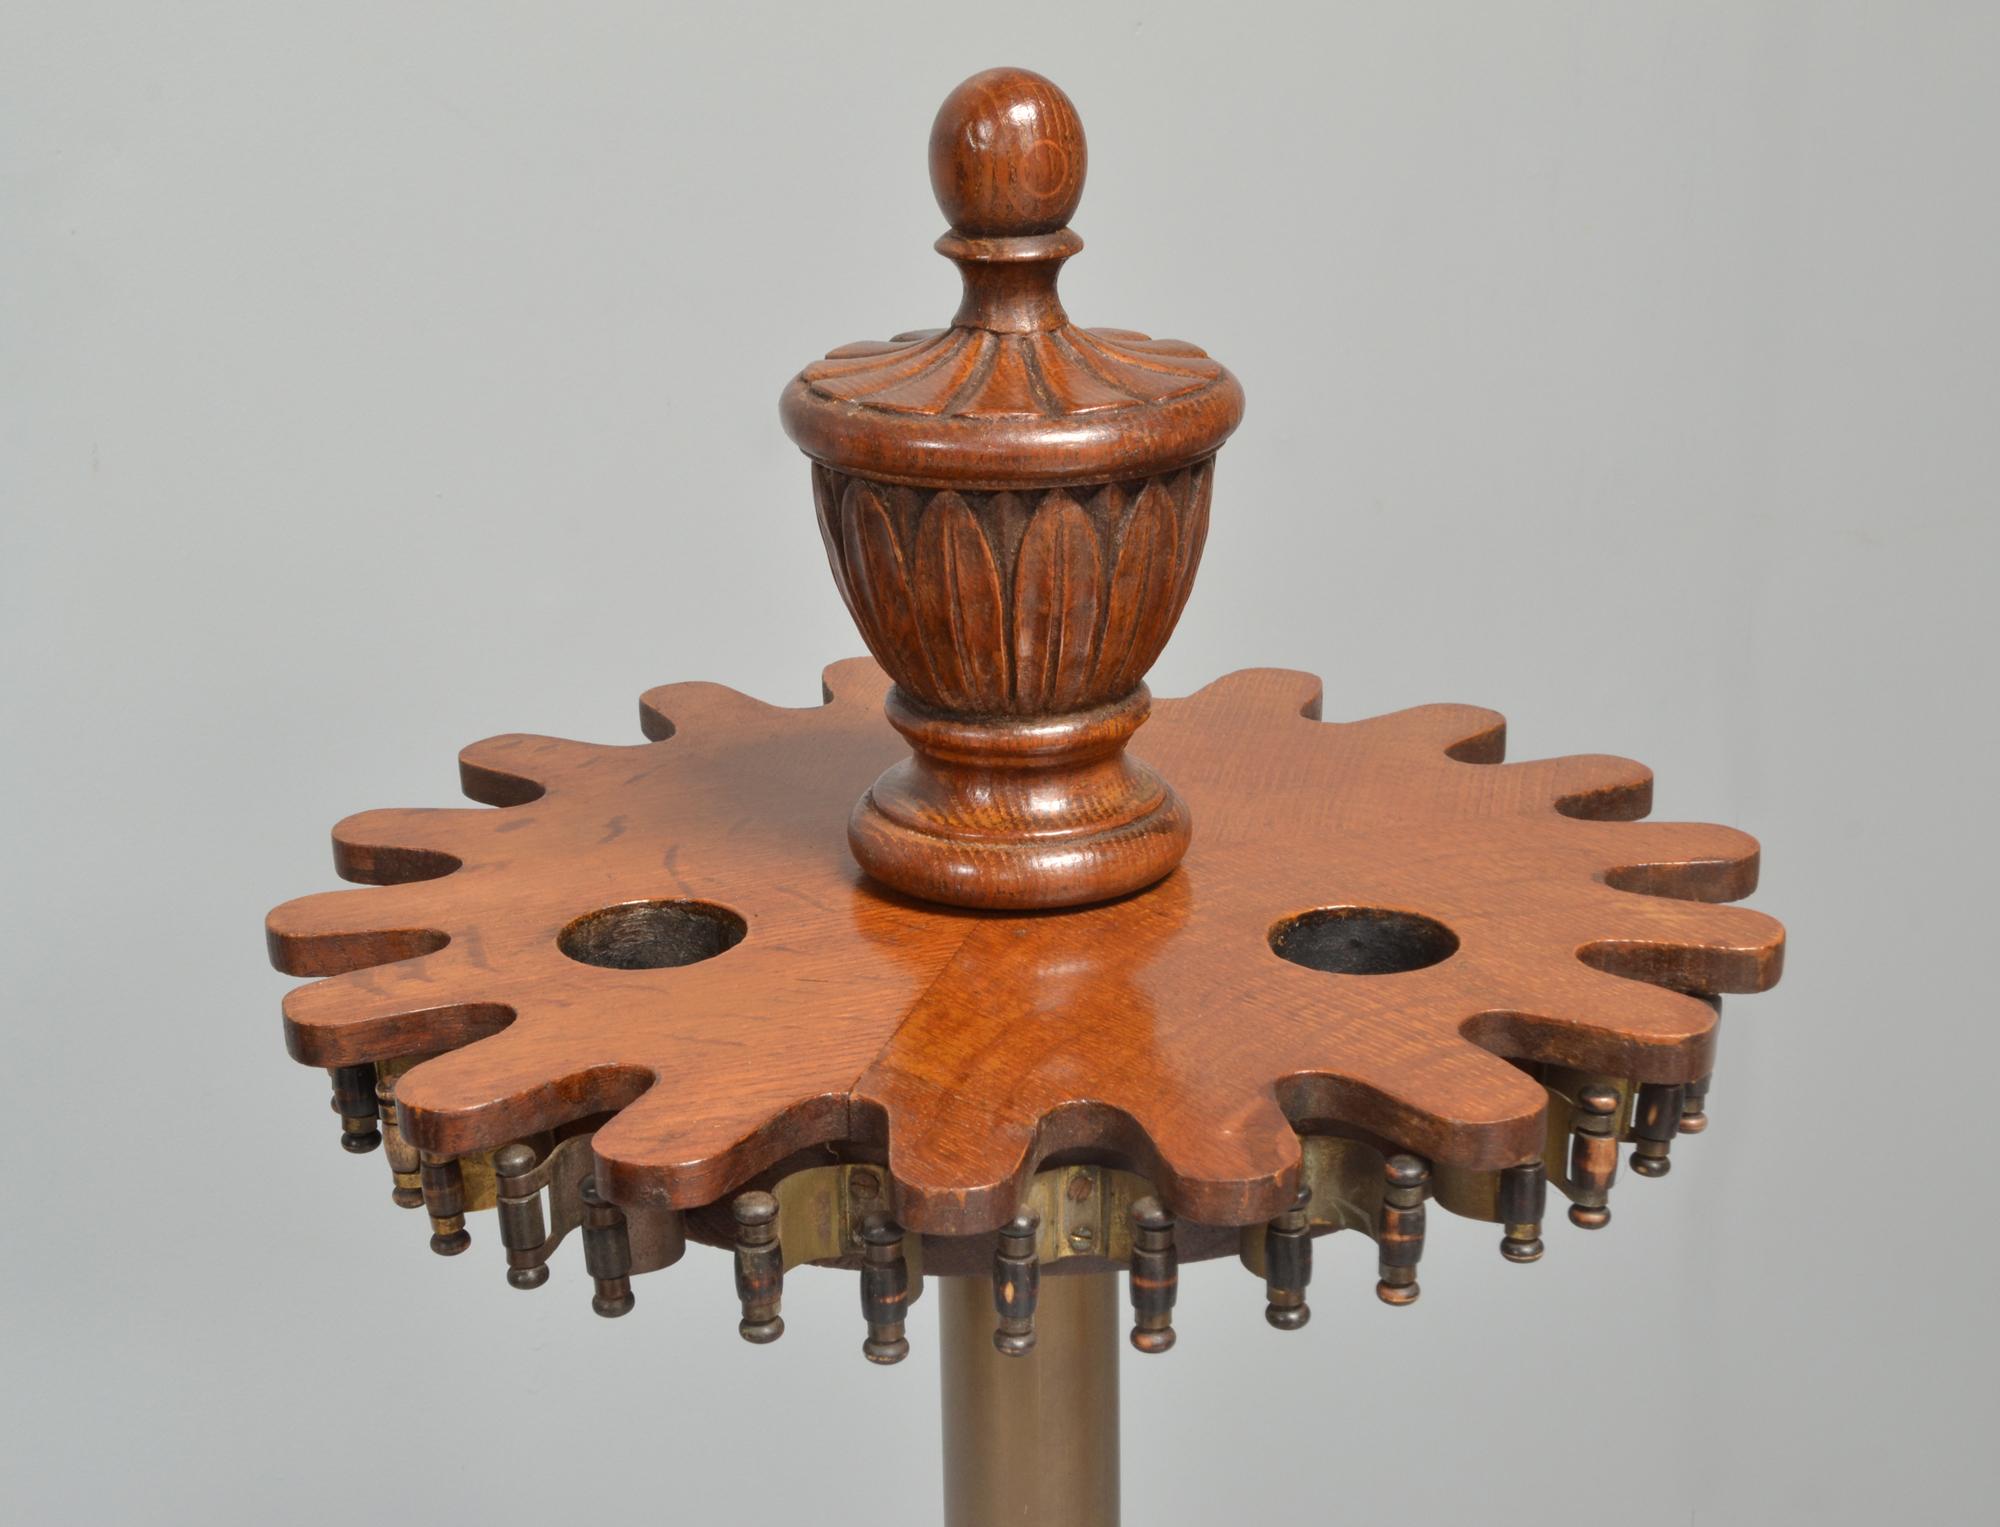 A revolving pool cue carousel or stick stand or rack by John Thurston of London, circa 1880.

A decorative carved finial above a flat shaped top with ebony brass sprung cue clips, connected to the gadrooned turntable base with a tubular brass